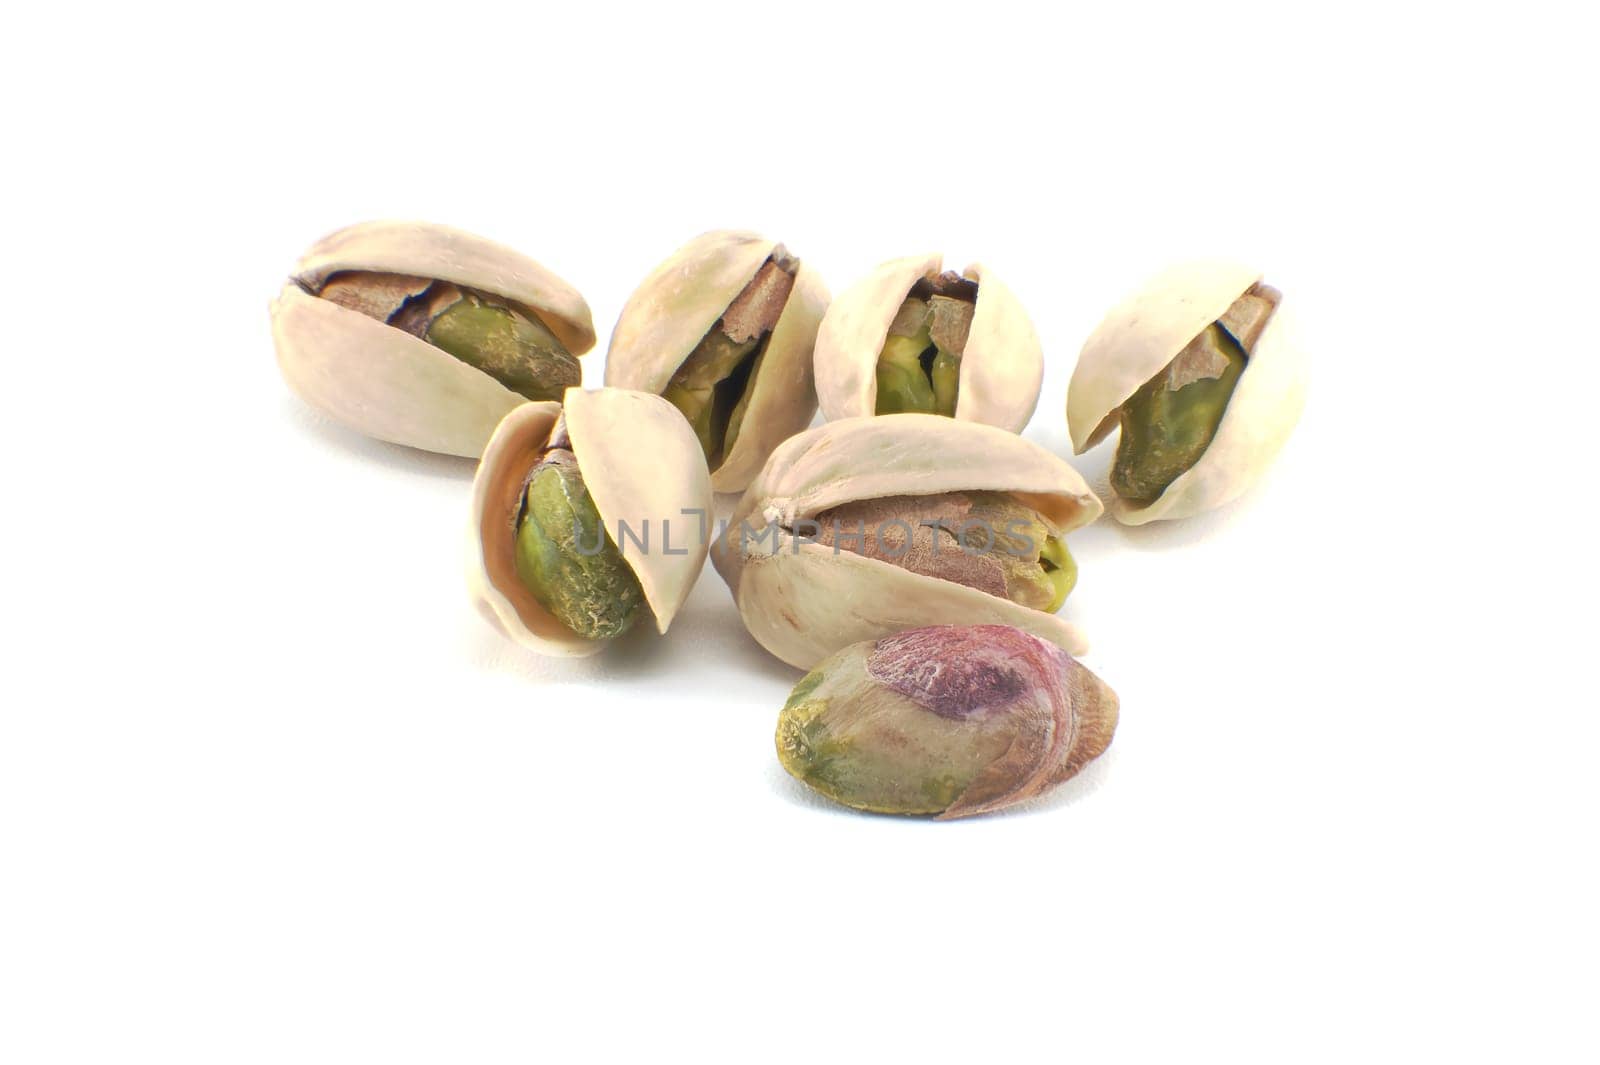 Randomly spread pistachios isolated on white by NetPix